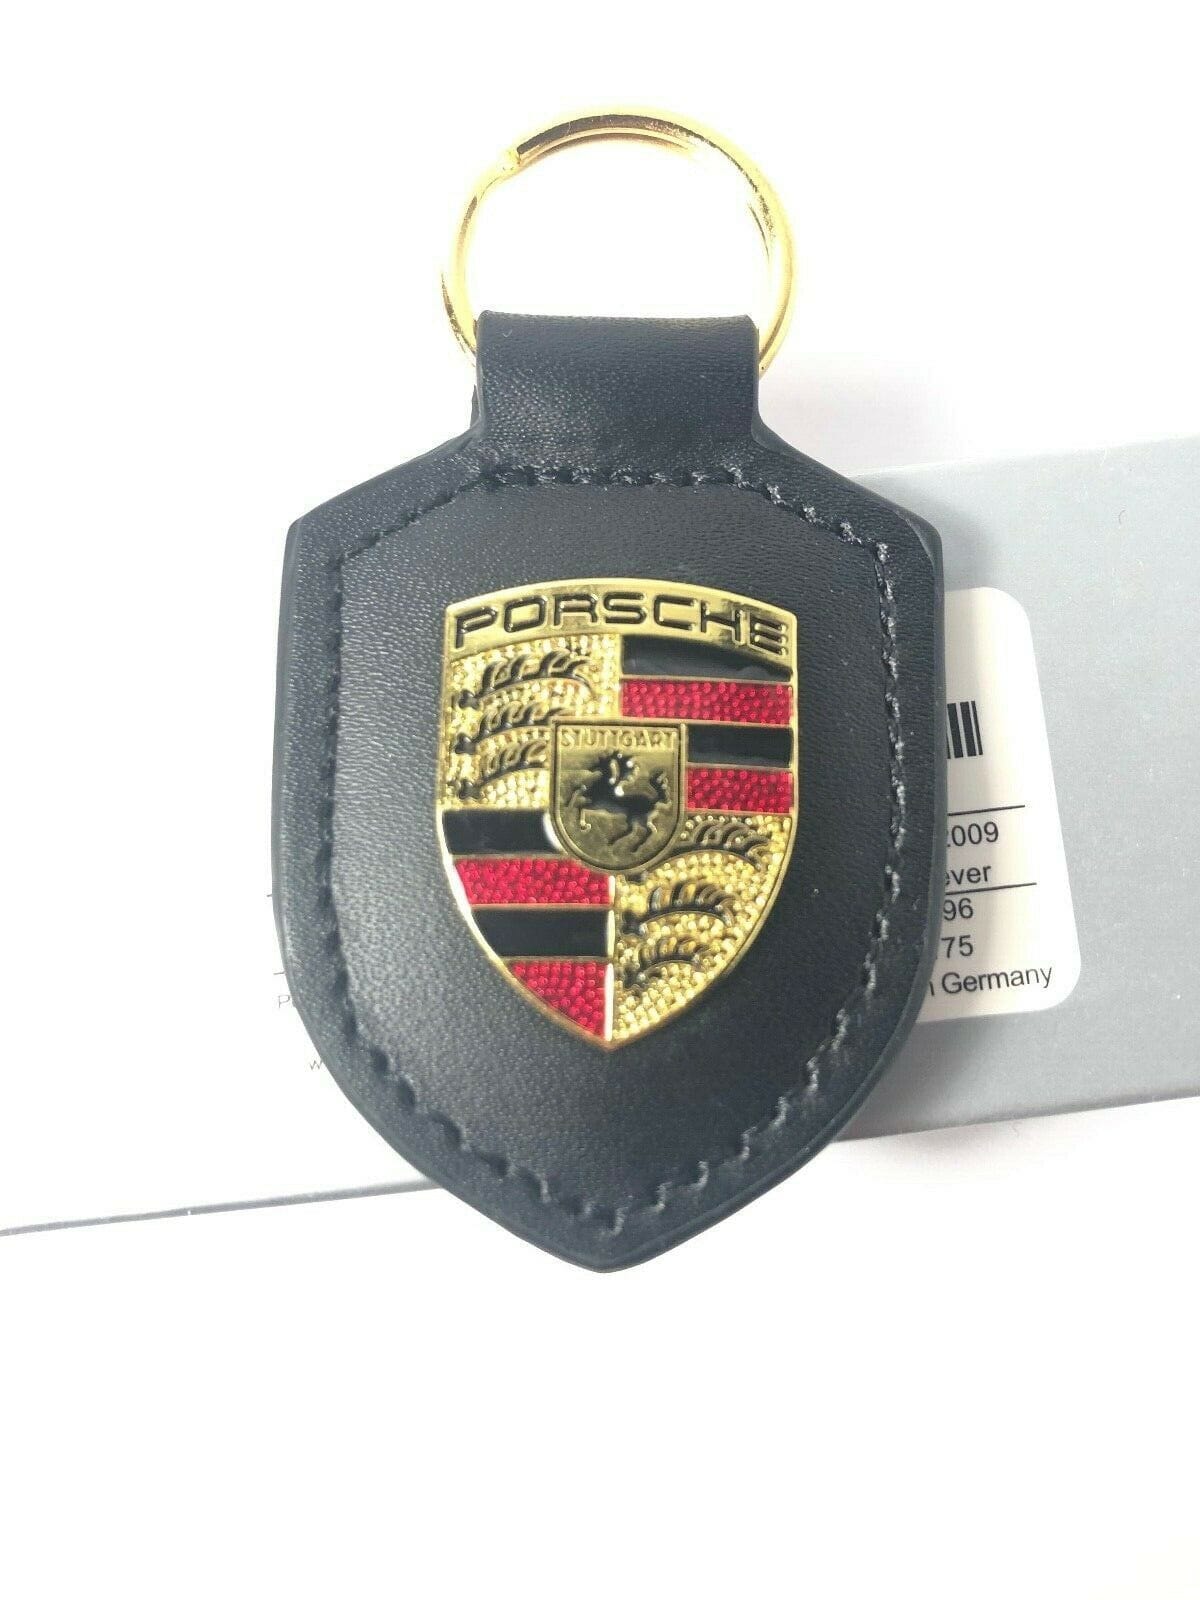 Accessories - Black Porsche Key Chain OEM and Valve Stem Caps OEM Both Unused - New - Dundee, IL 60118, United States